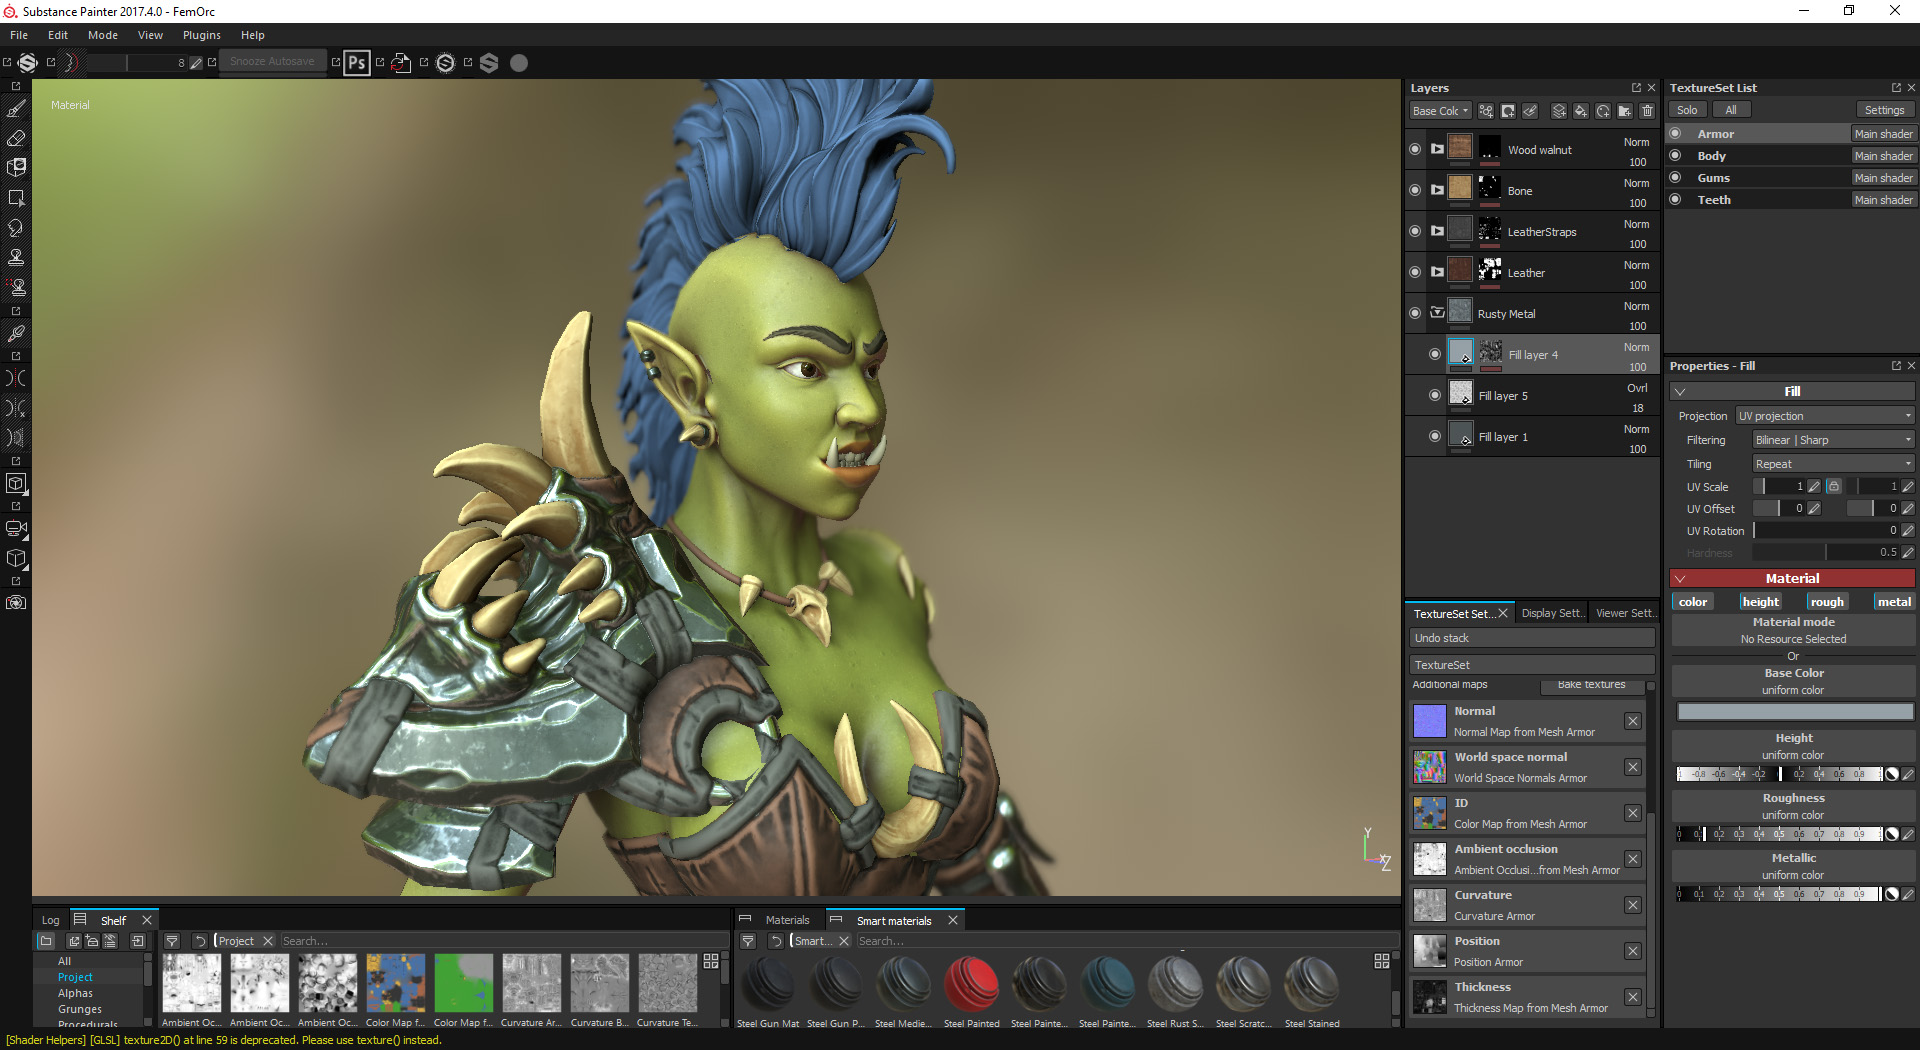 substance painter 2021 free download